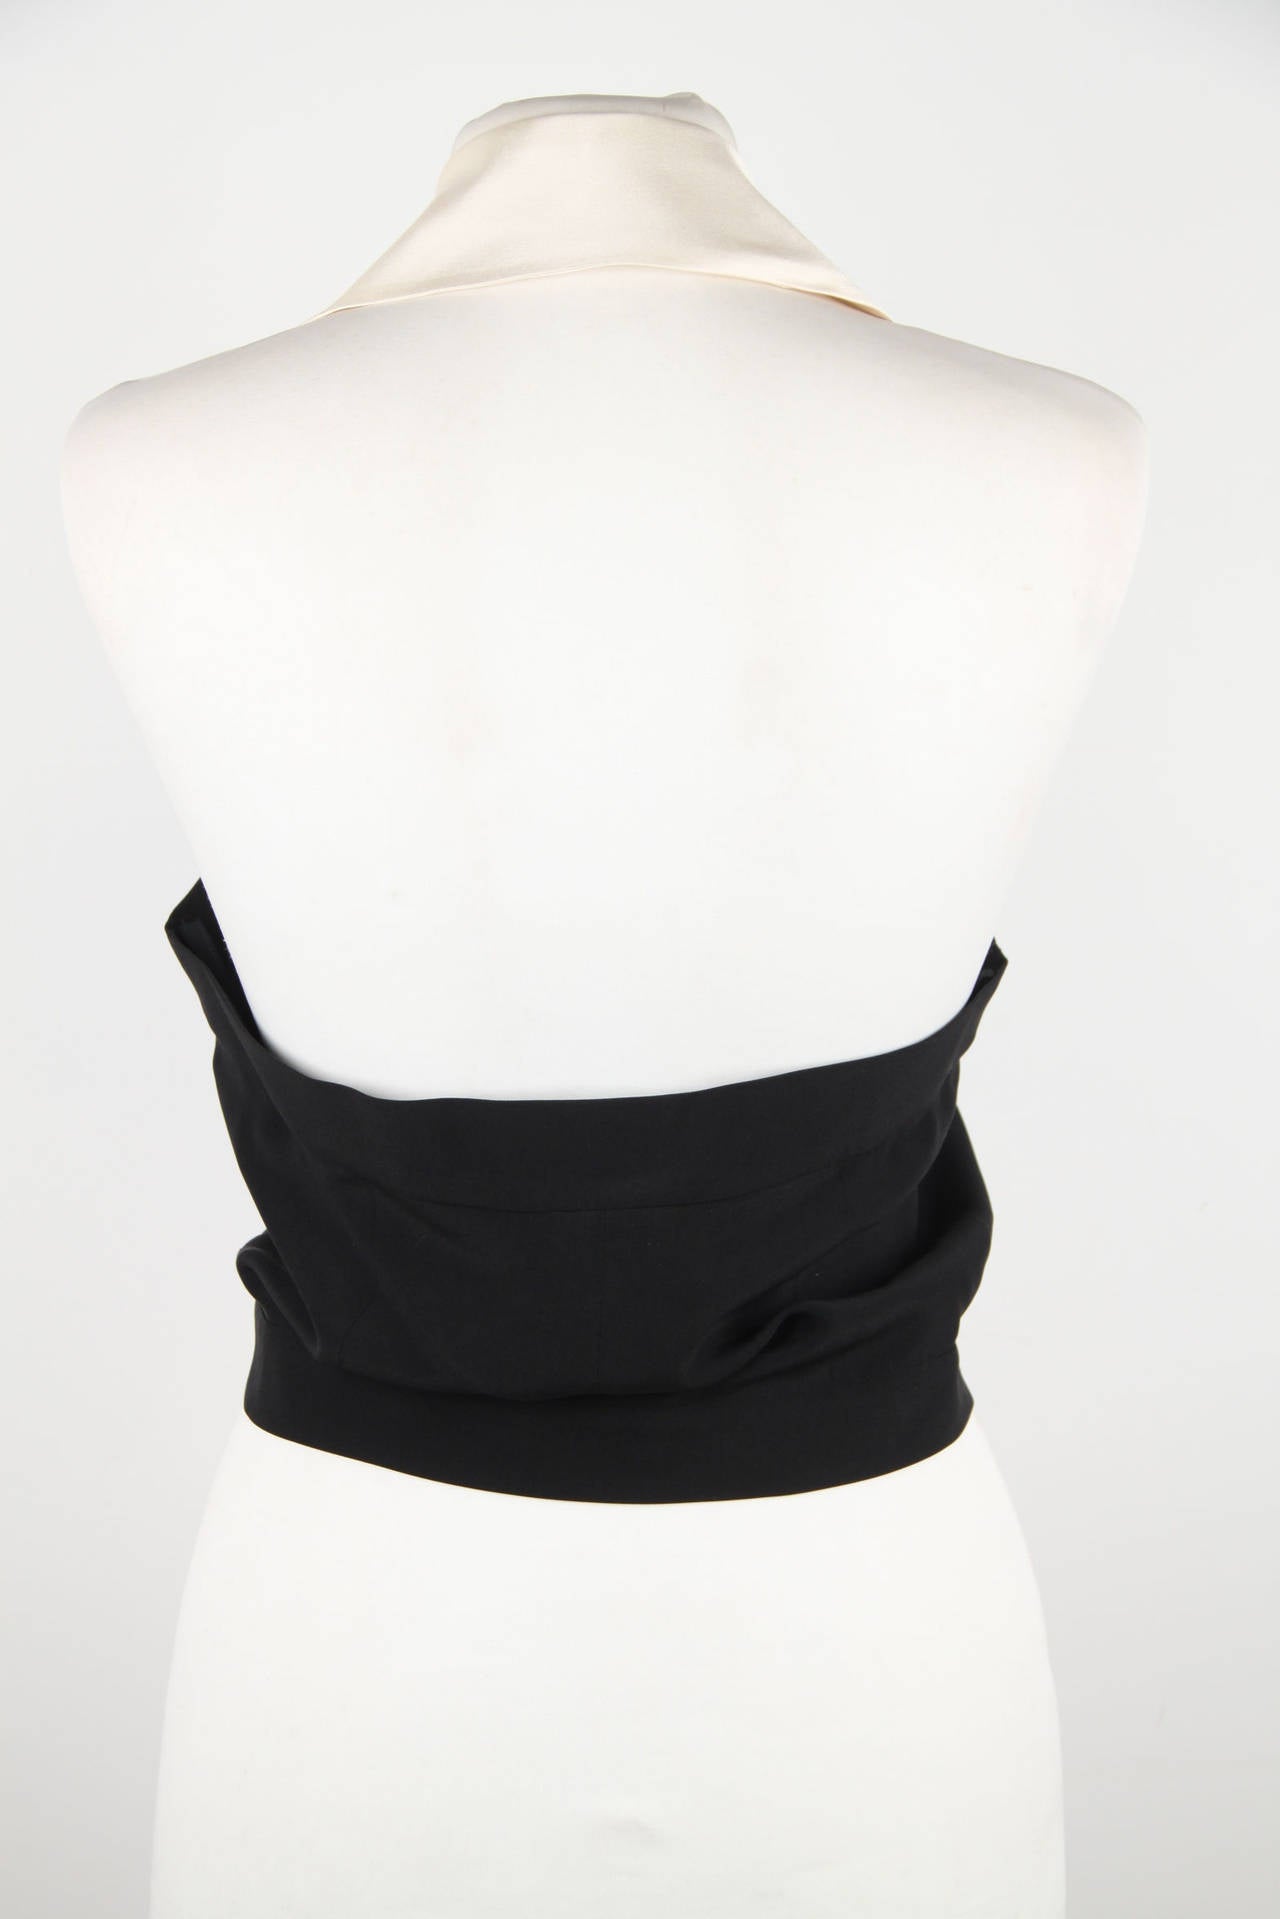 CHANEL BOUTIQUE Vintage Black Silk RUFFLED Cropped TOP w/ Sequins Sz 38 2